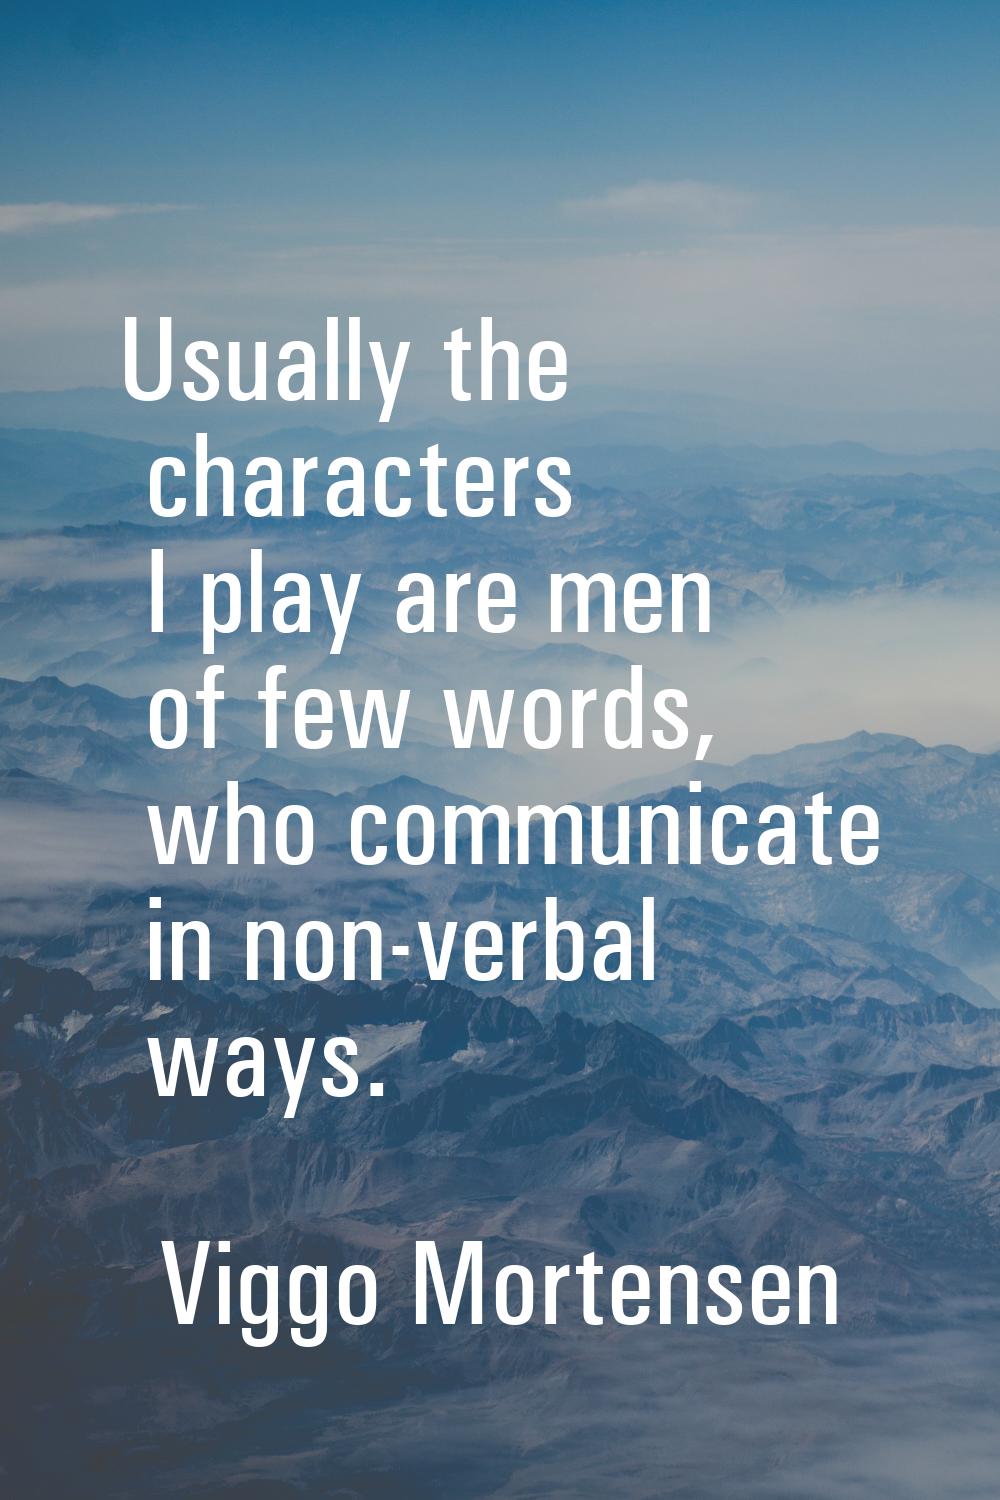 Usually the characters I play are men of few words, who communicate in non-verbal ways.